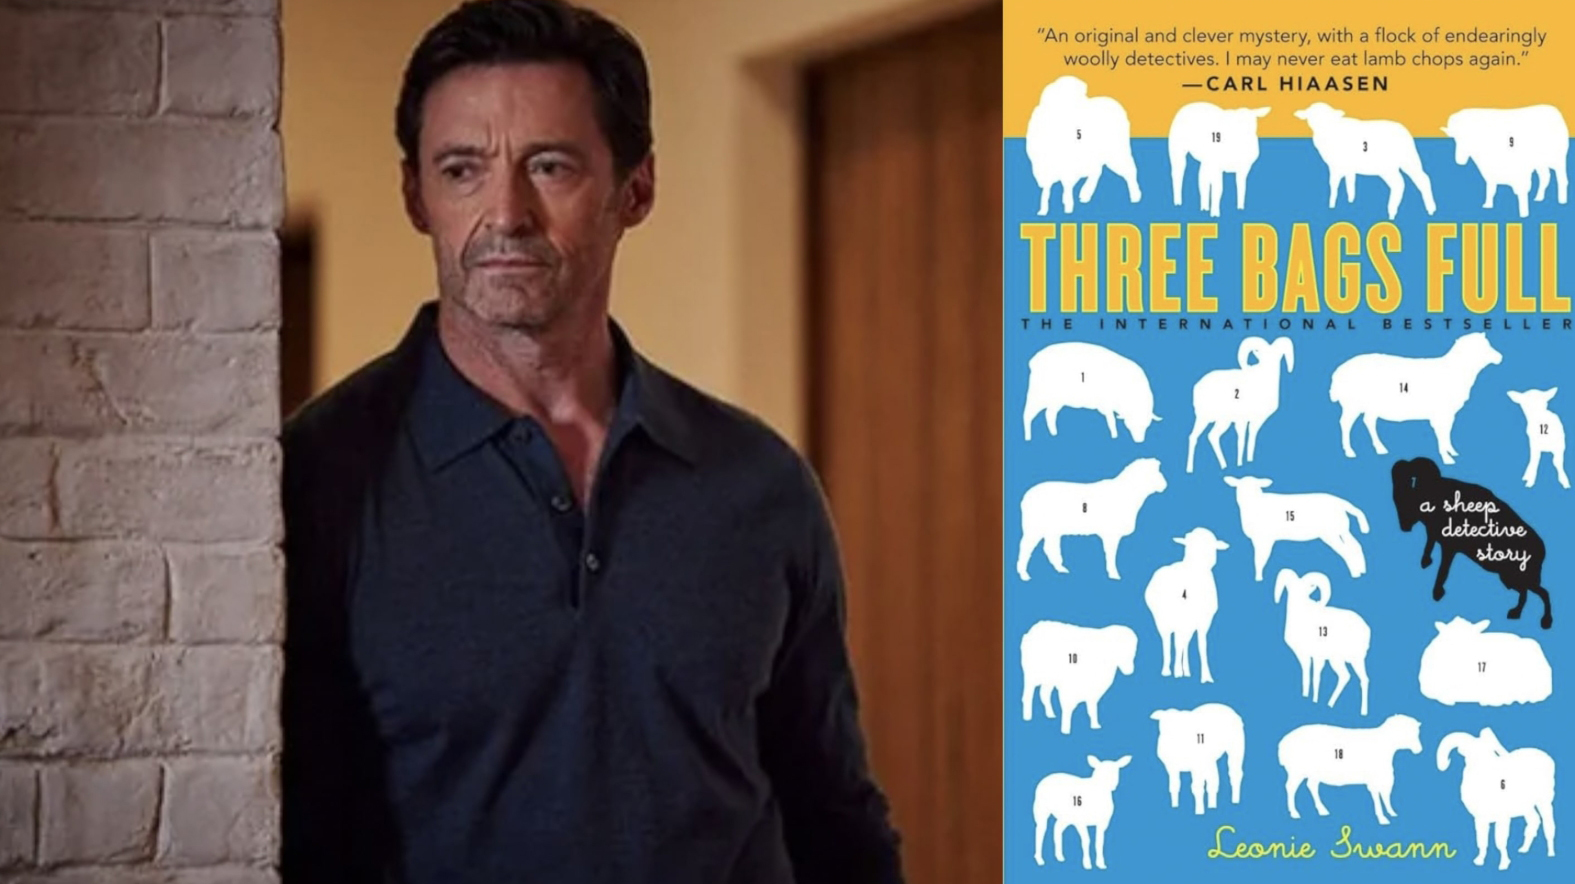 Hugh Jackman And Emma Thompson To Star In Sheep Detective Comedy ‘Three Bags Full’